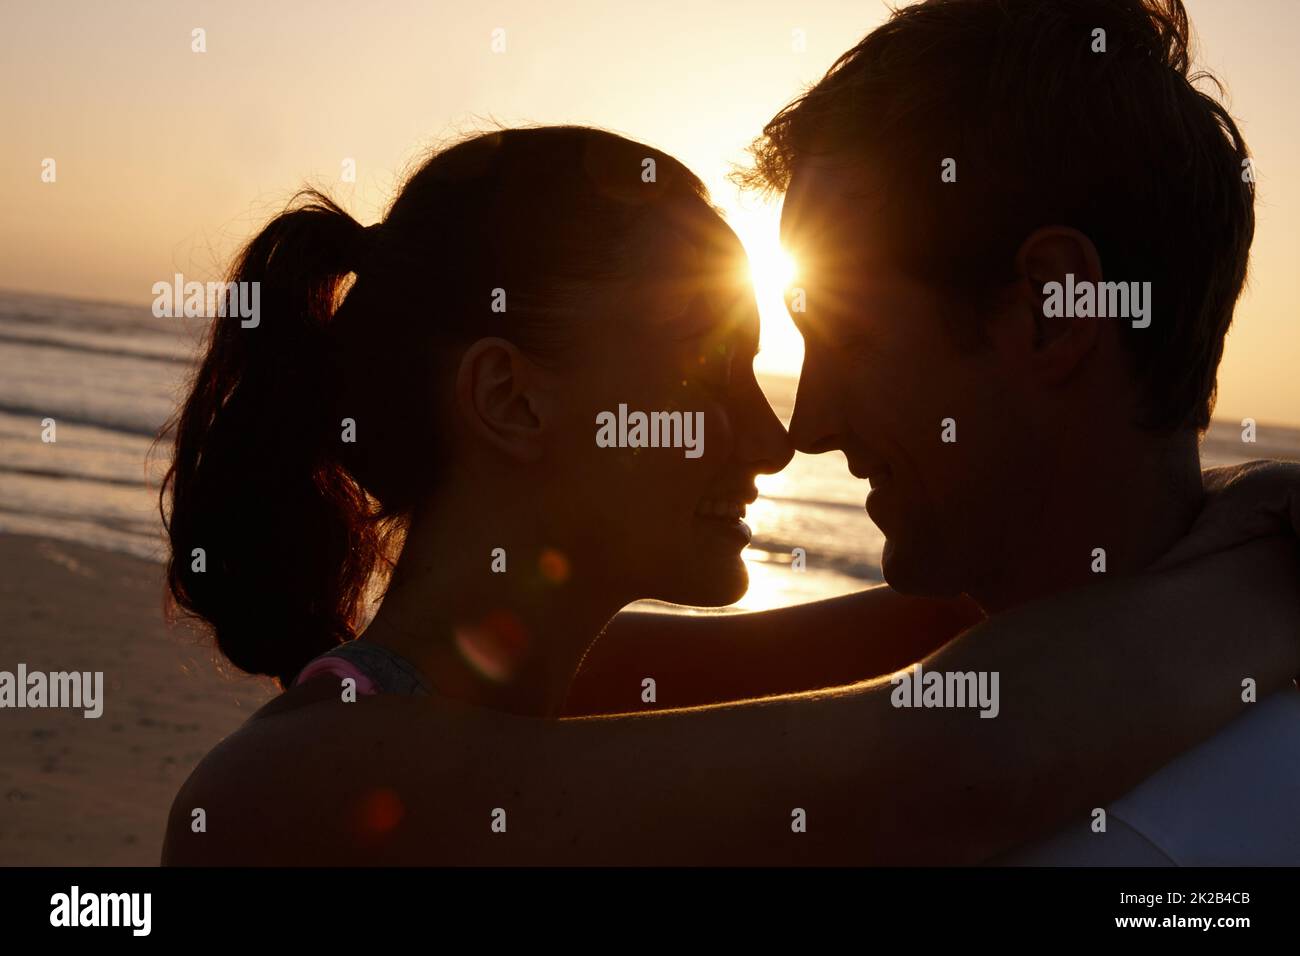 True love at sunset. Silhouette of a couple being romantic at the beach at sunset. Stock Photo